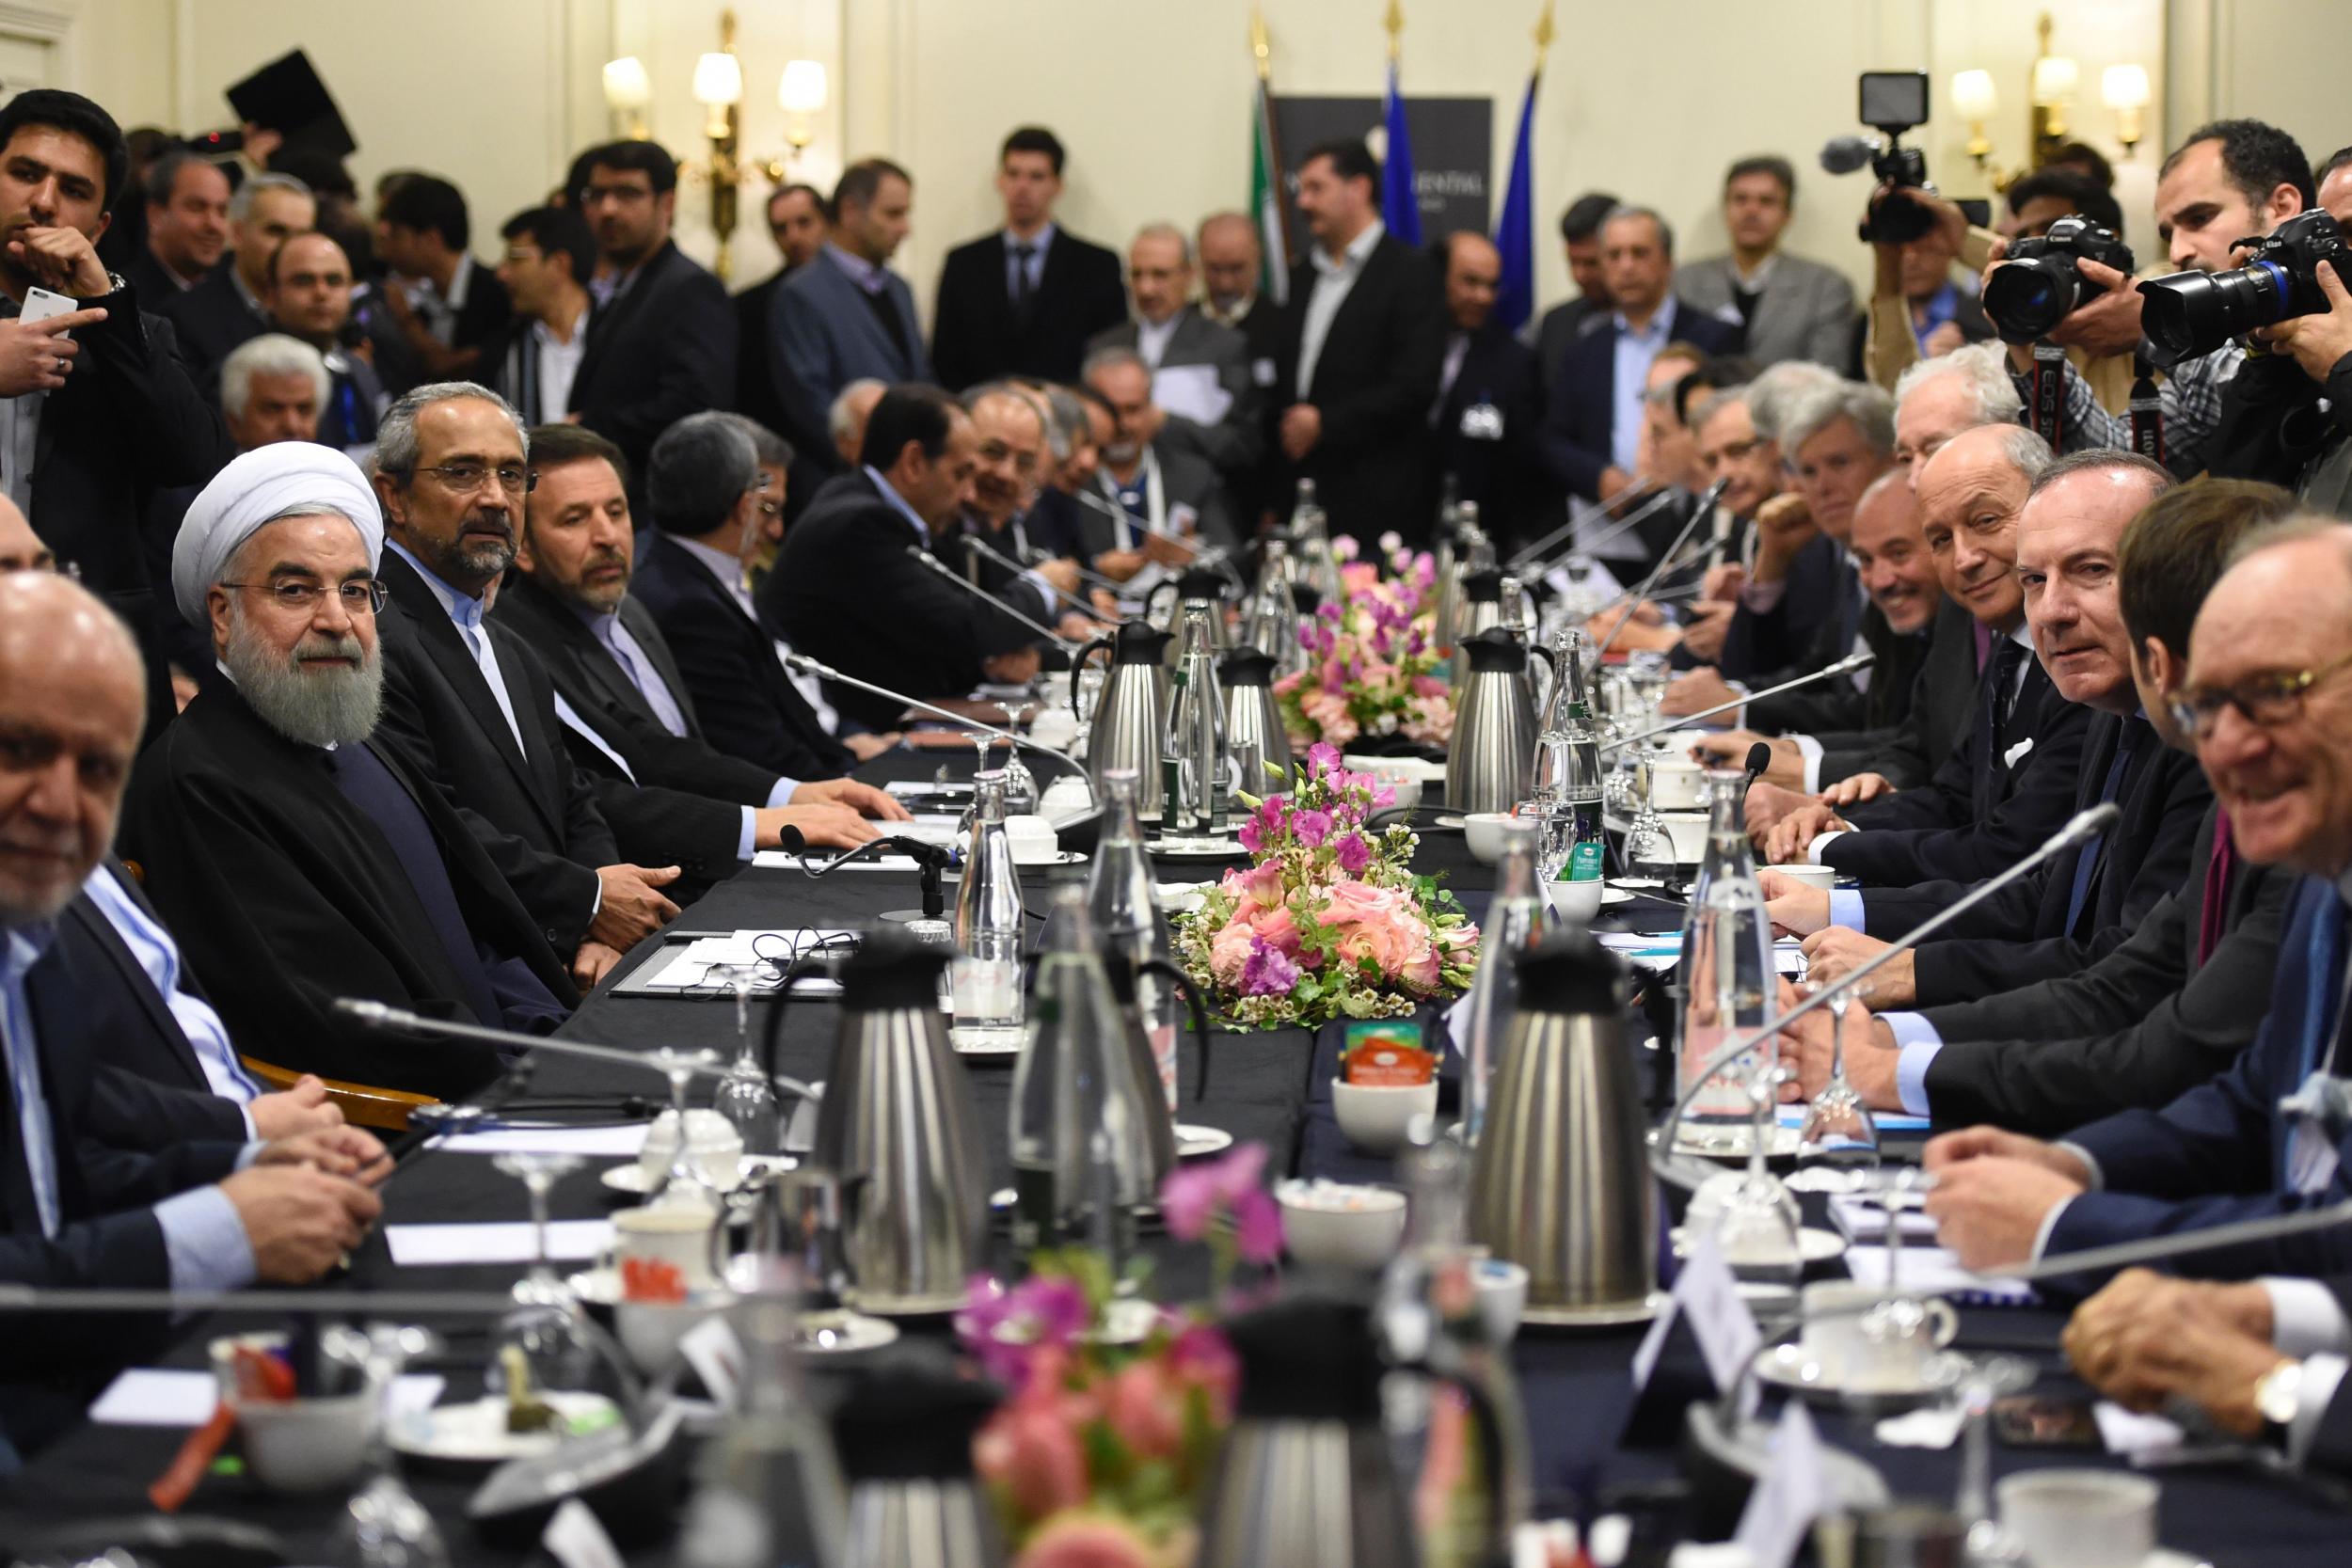 &#13;
Iranian President Hassan Rouhani (3rd-L) and Iranian Foreign Minister Mohammad Javad Zarif (2nd-L) attend a meeting with French Economy Minister Emmanuel Macron (2nd-R), Movement of the Enterprises of France (MEDEF) president Pierre Gattaz (3rd-R) and French Foreign Minister Laurent Fabius (4th-R) in Paris on 27 January 2016.&#13;